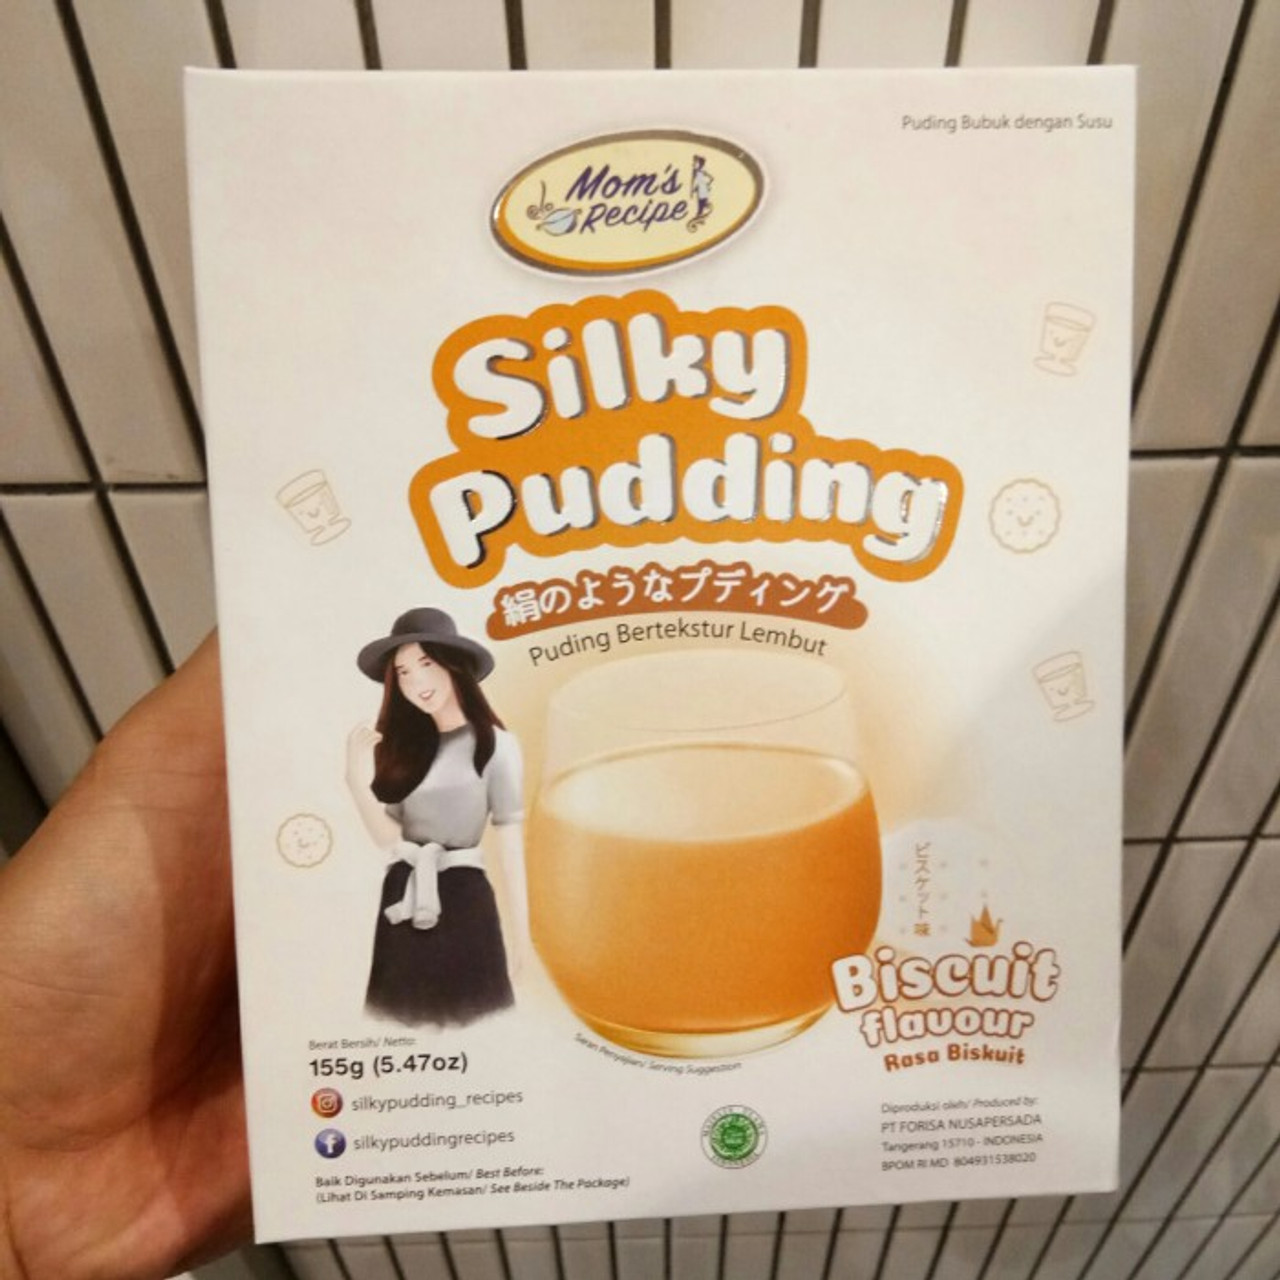 Mom's Recipe Silky Pudding Biscuit, 155gr